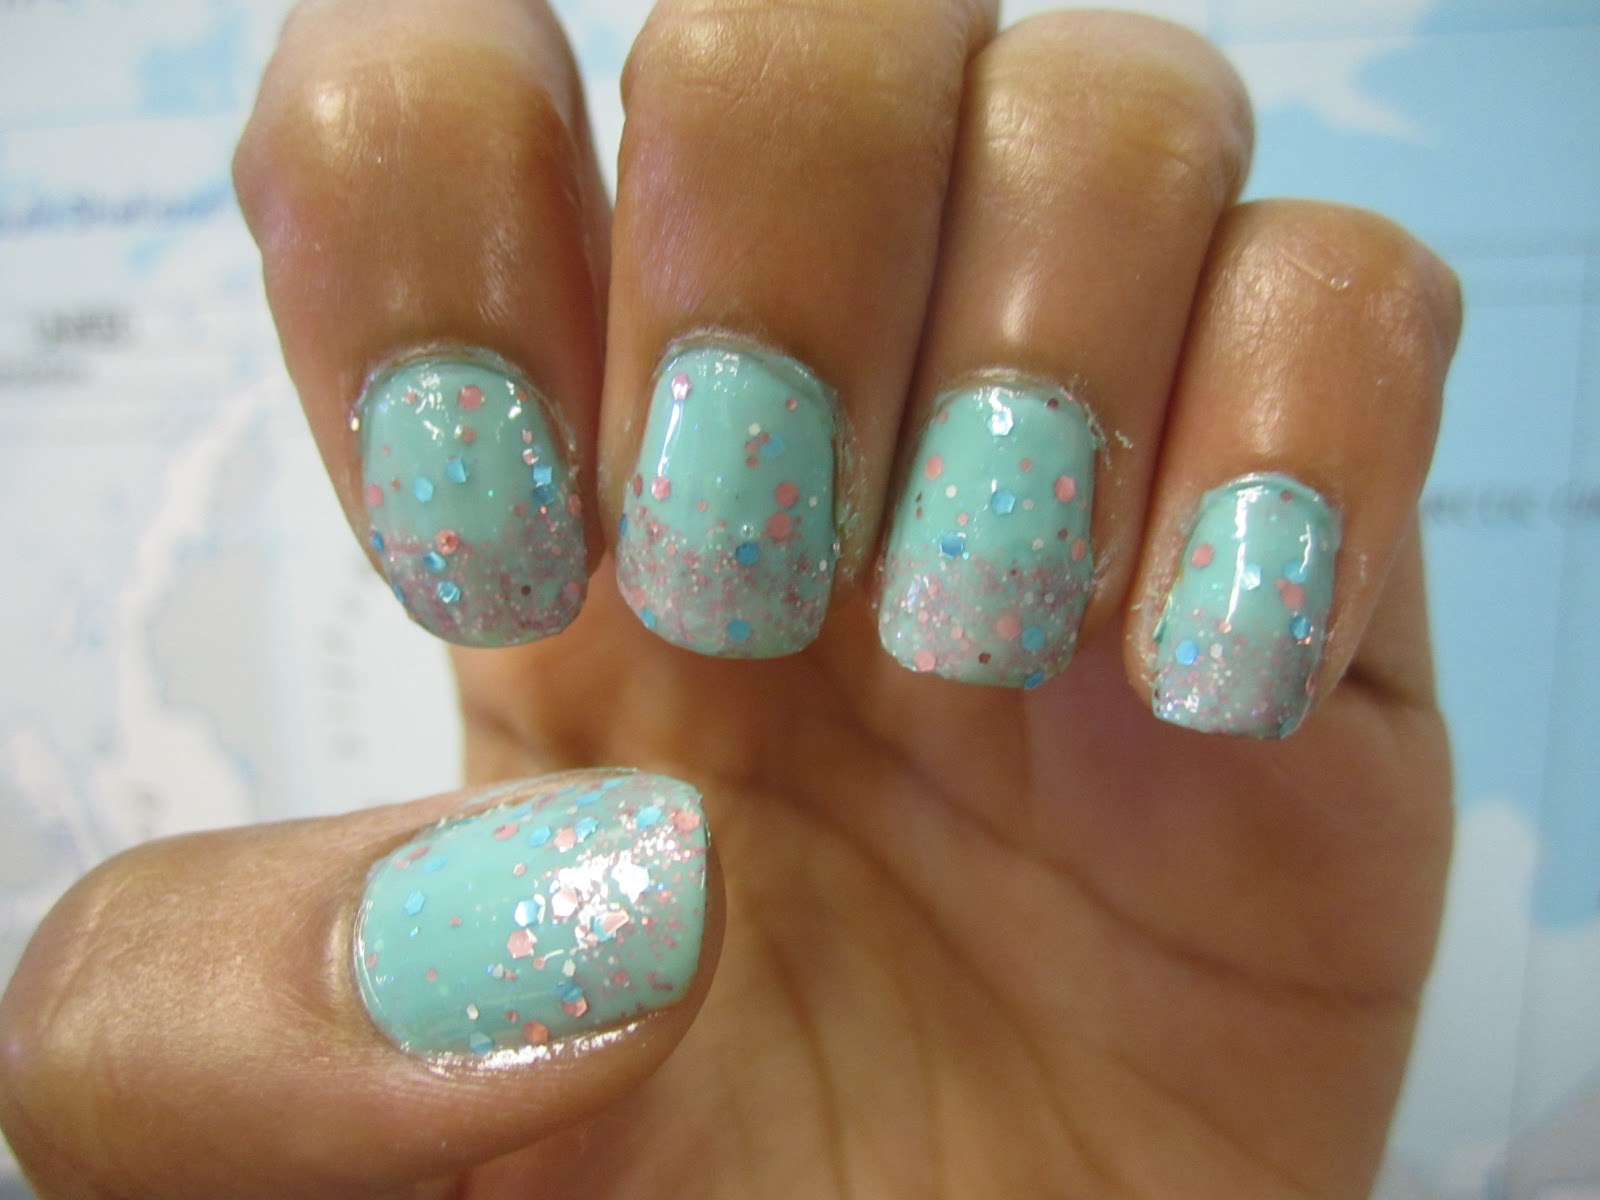 Mermaid Nail Design Ideas for Short Nails - wide 3